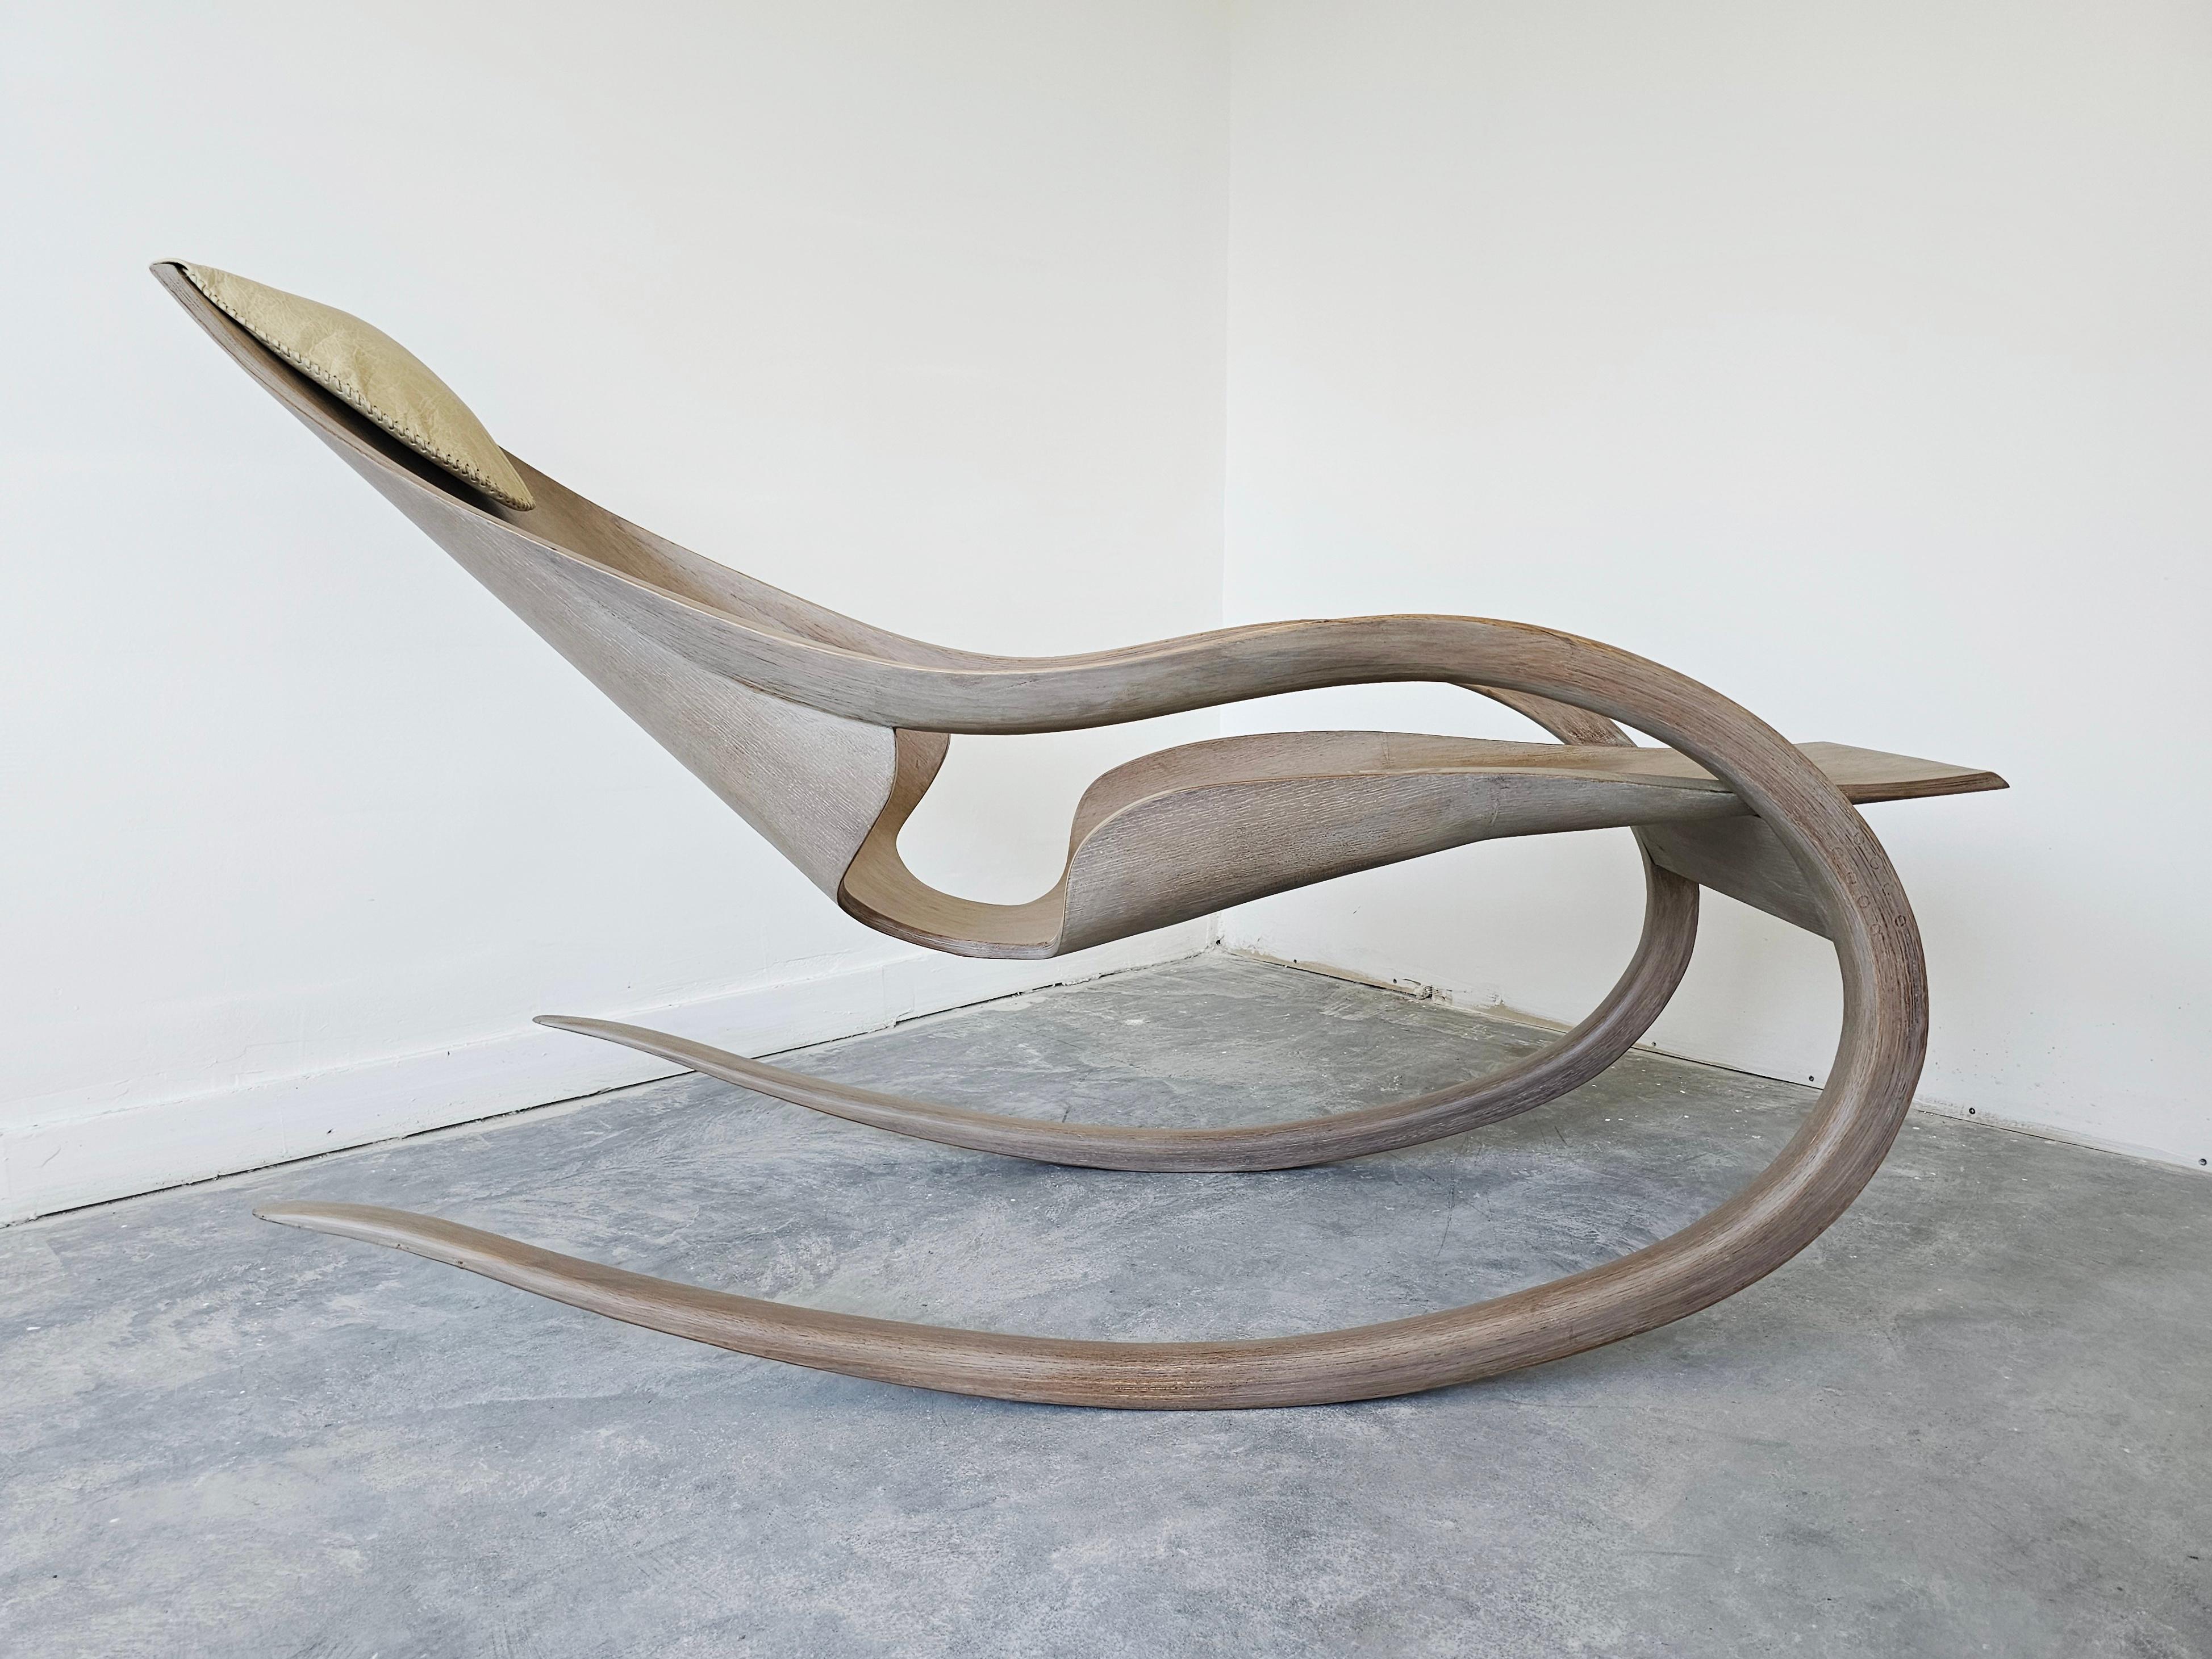 Breathtaking Sculptural Rocking Chair done in molded Ash plywood featuring mesmerizing organic lines, resembling the work of the American artist and designer Wendell Castle. The chair is used in the lying condition. It is a unique, handmade